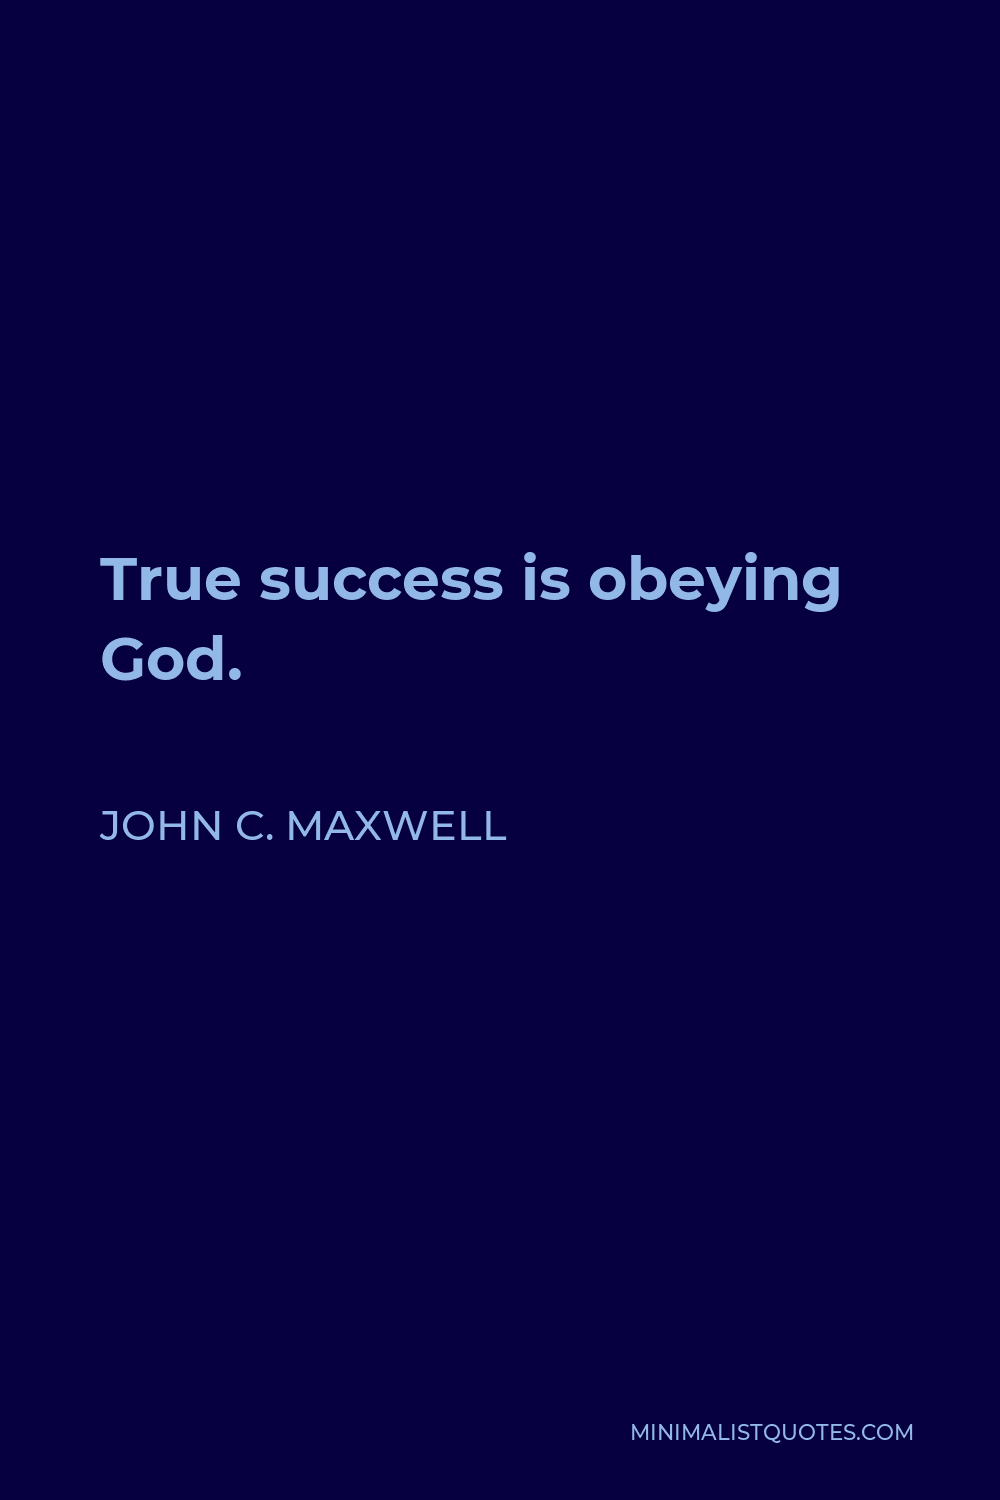 John C. Maxwell Quote - True success is obeying God.